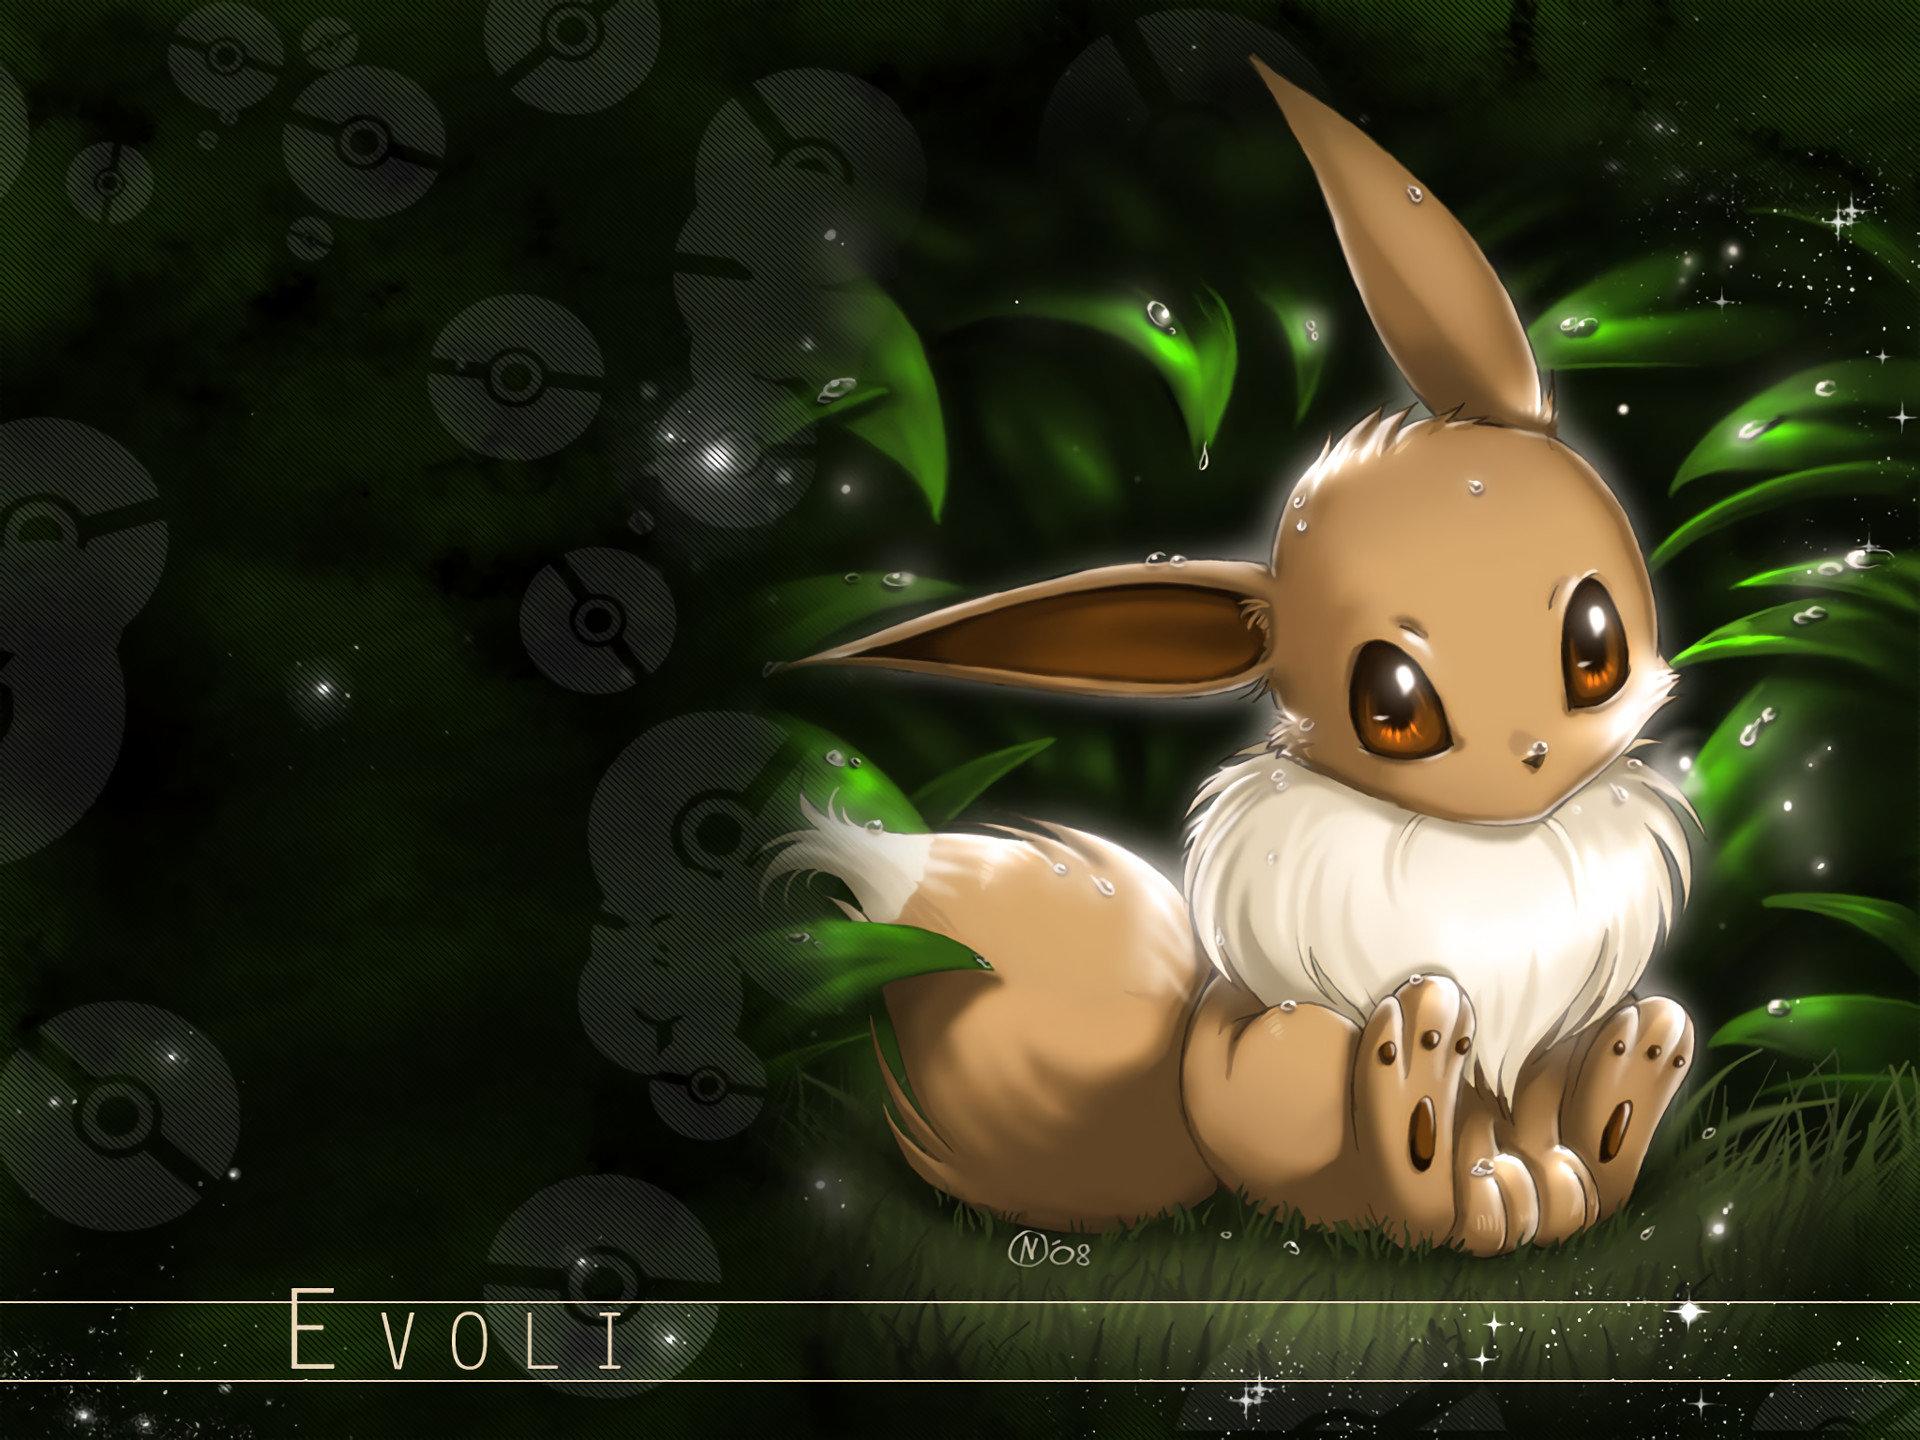 Awesome Eevee (Pokemon) free background for HD